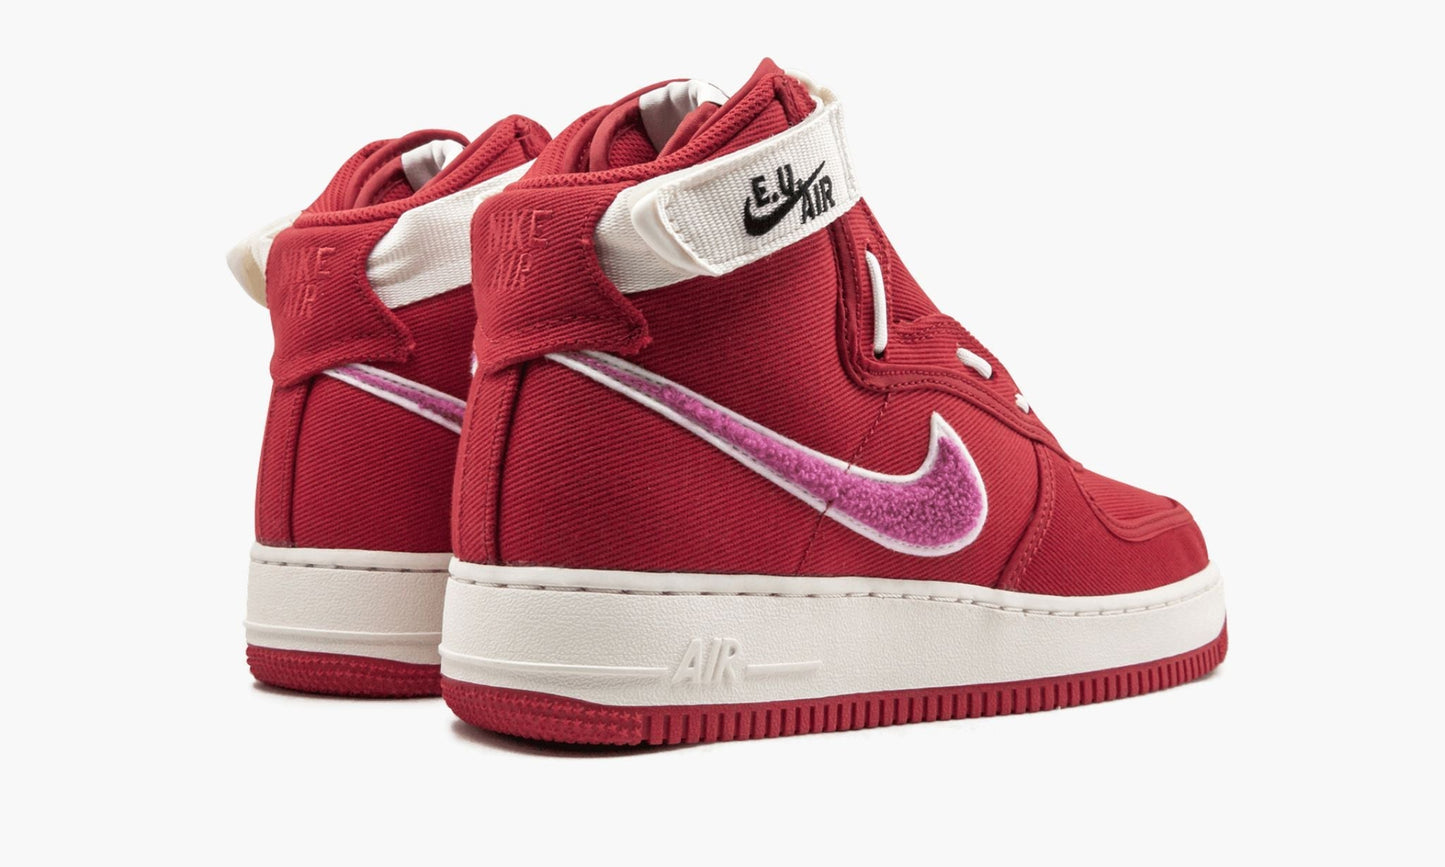 Air Force 1 High / EU "Emotionally Unavailable"